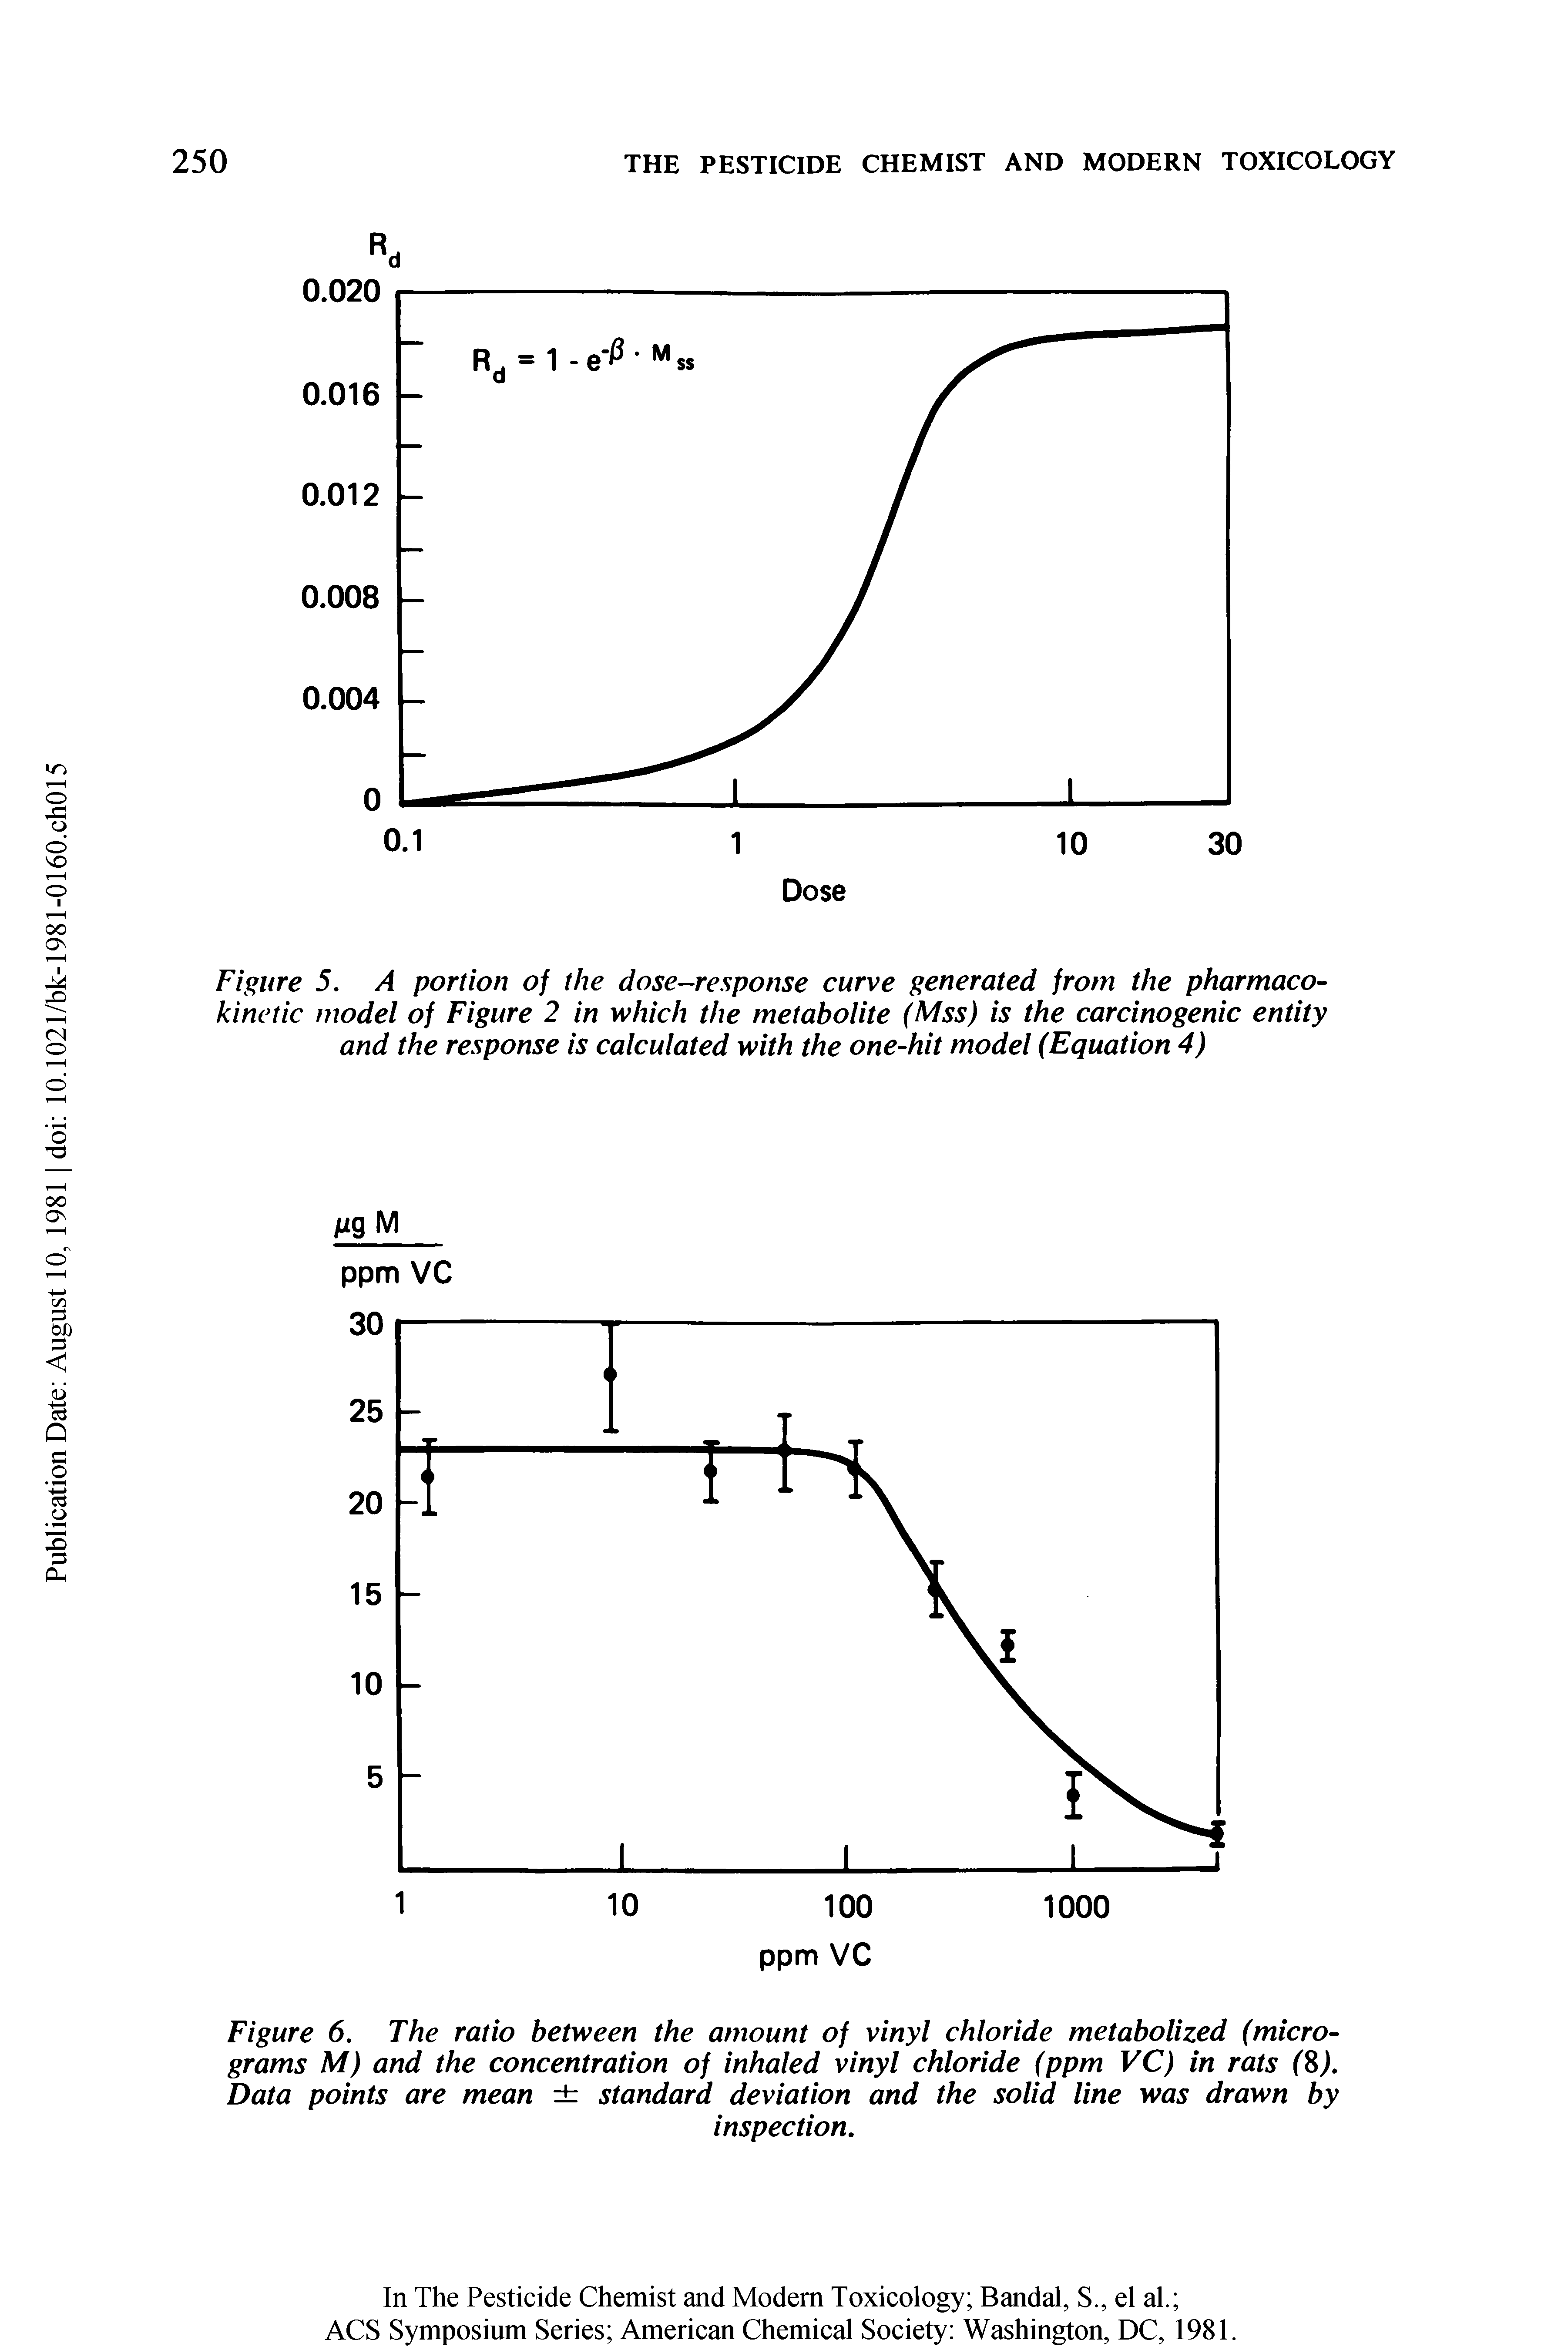 Figure 6. The ratio between the amount of vinyl chloride metabolized (micrograms M) and the concentration of inhaled vinyl chloride (ppm VC) in rats Data points are mean standard deviation and the solid line was drawn by...